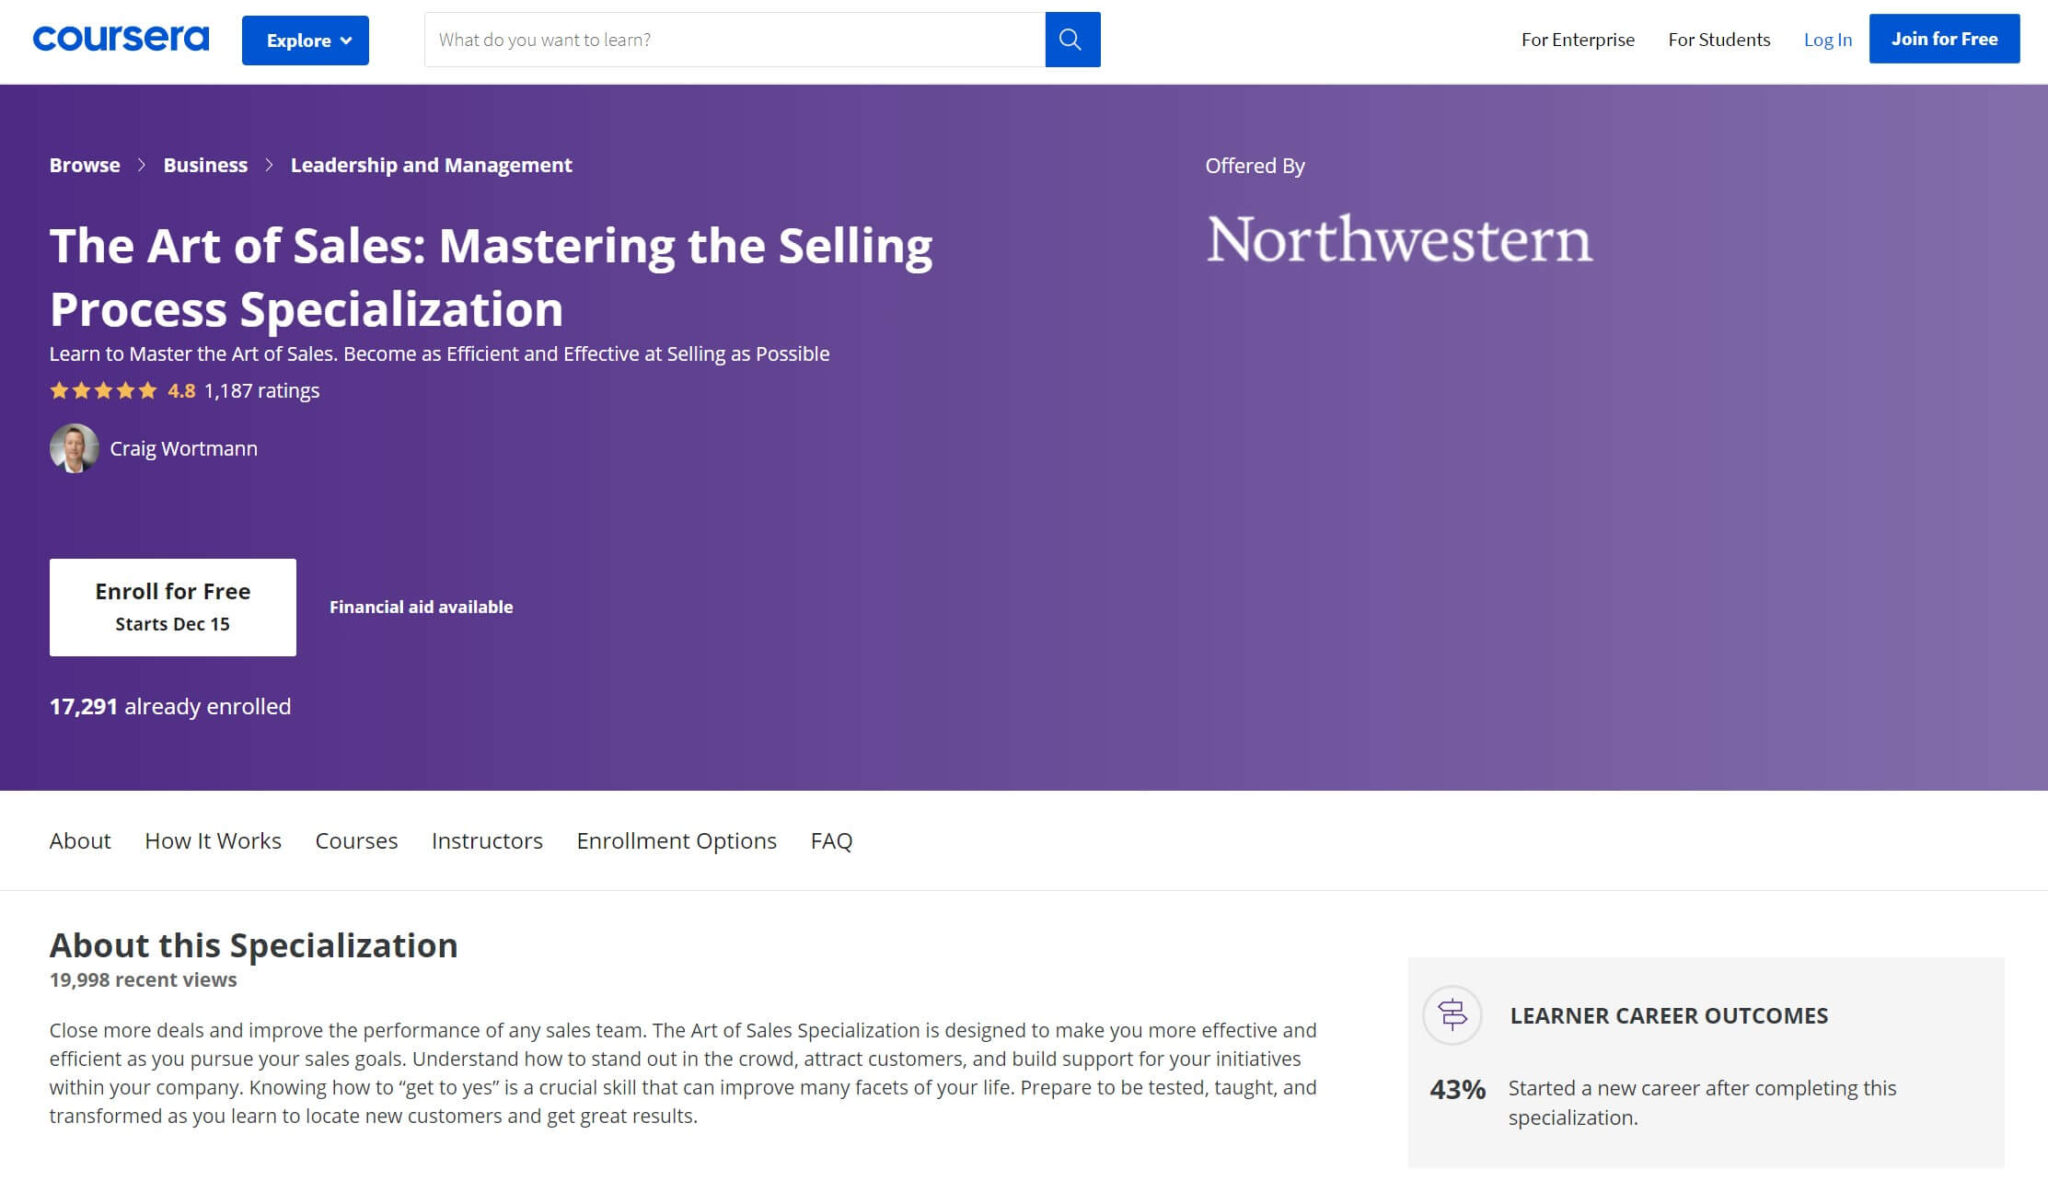 The Art of Sales online training course.